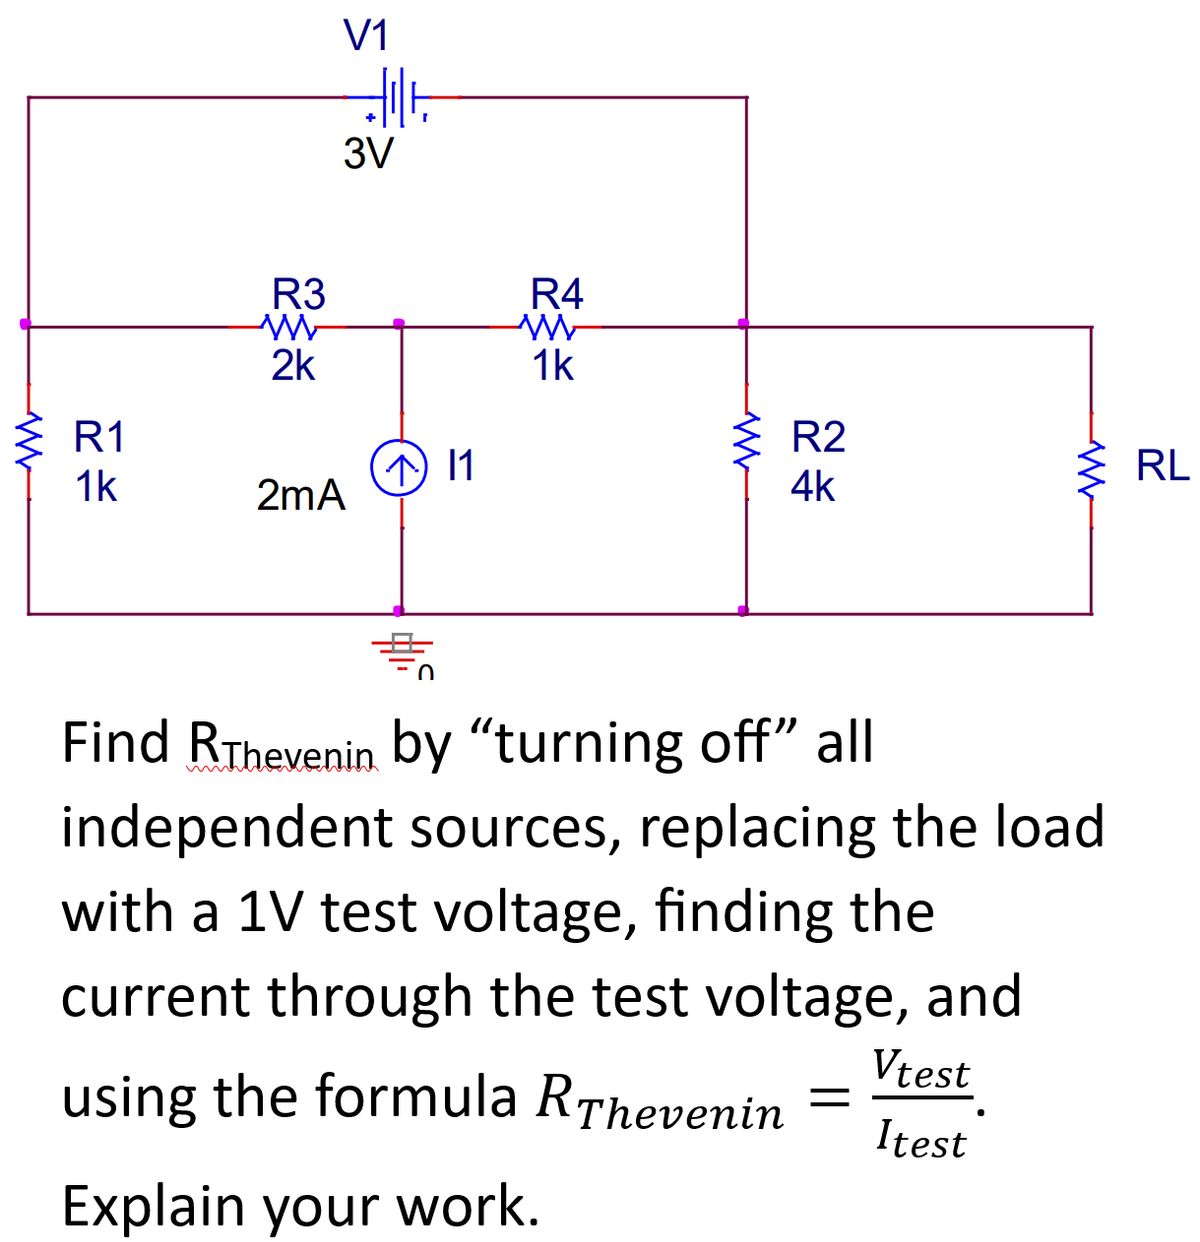 Www
R1
1k
R3
WWW
2k
V1
Jult
3V
2mA
^ 11
0
R4
W
1k
www
R2
4k
WW
Find RThevenin by "turning off" all
independent sources, replacing the load
with a 1V test voltage, finding the
current through the test voltage, and
using the formula RThevenin
Explain your work.
Vtest
Itest
RL